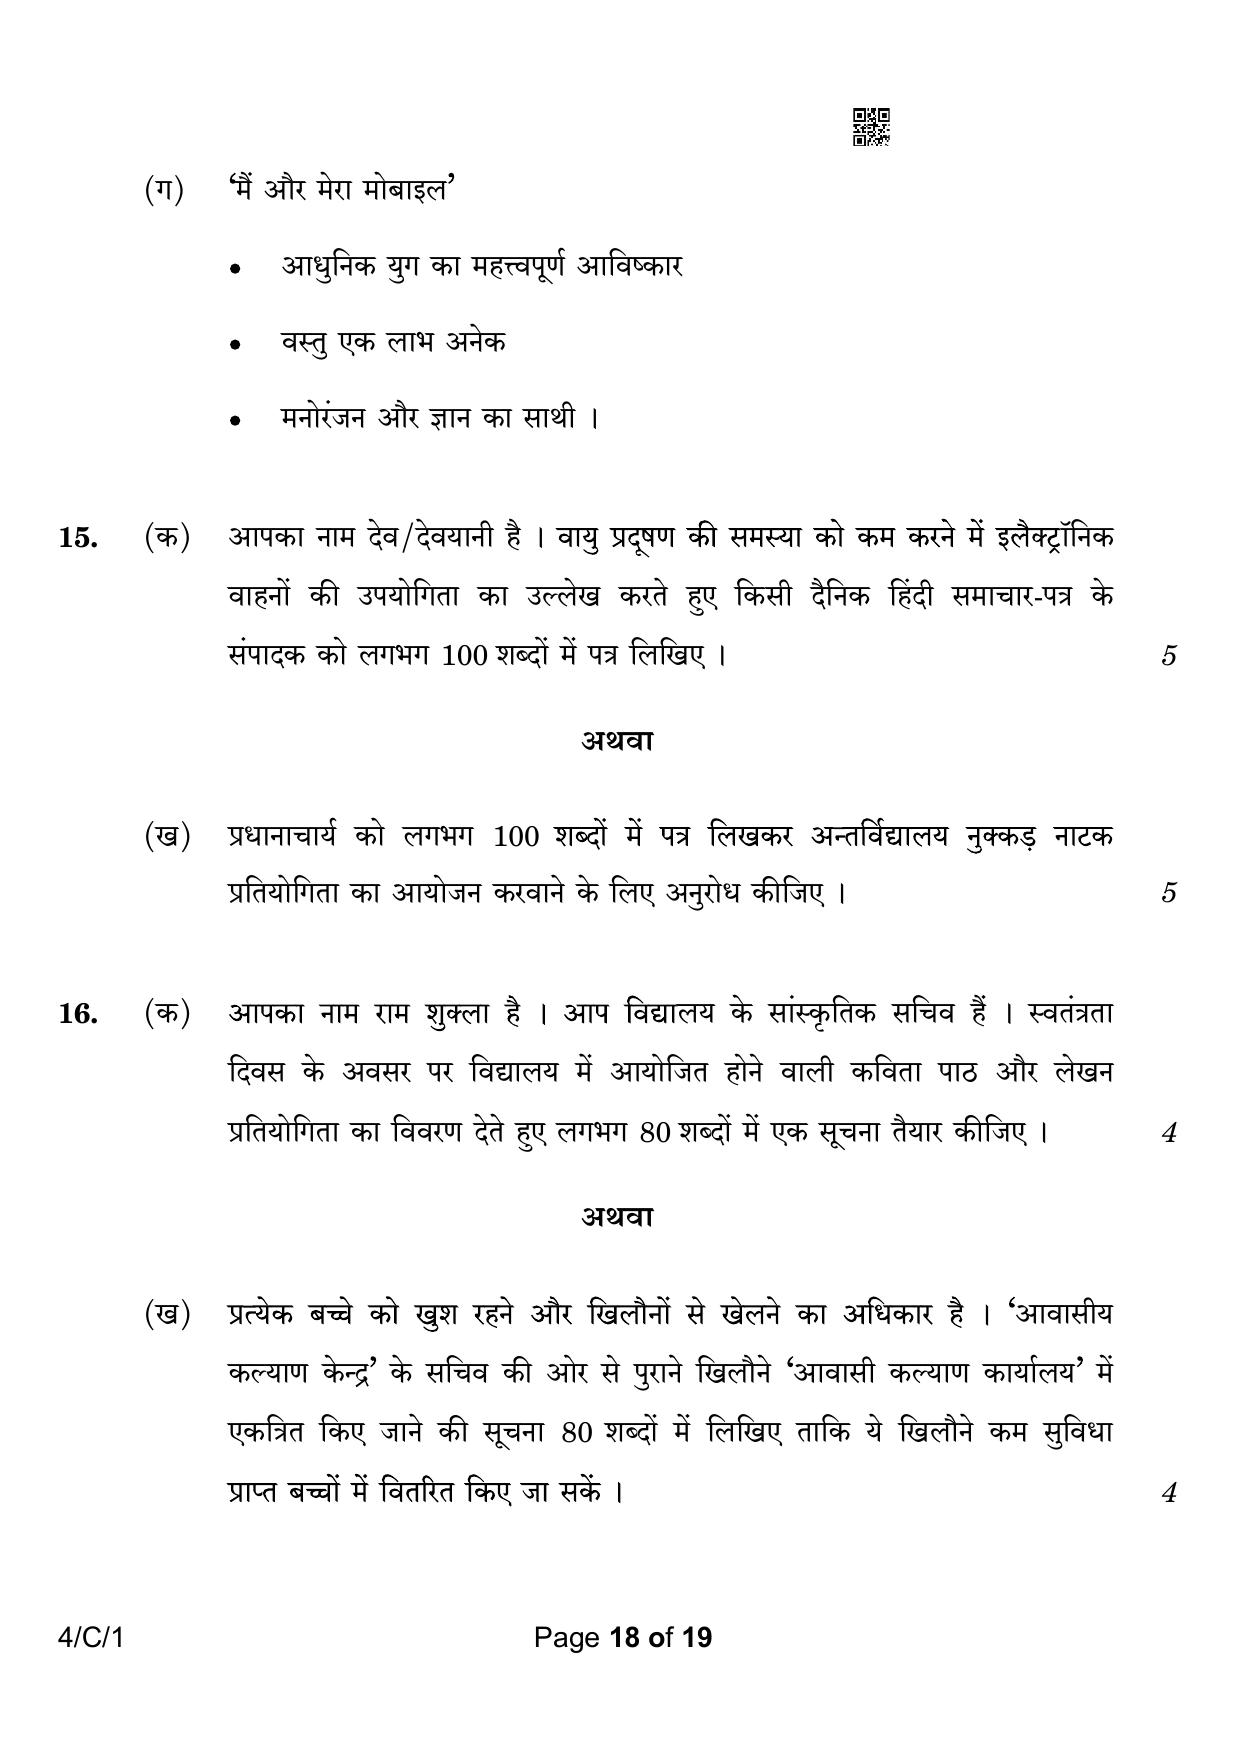 CBSE Class 10 4-1 Hindi B 2023 (Compartment) Question Paper - Page 18